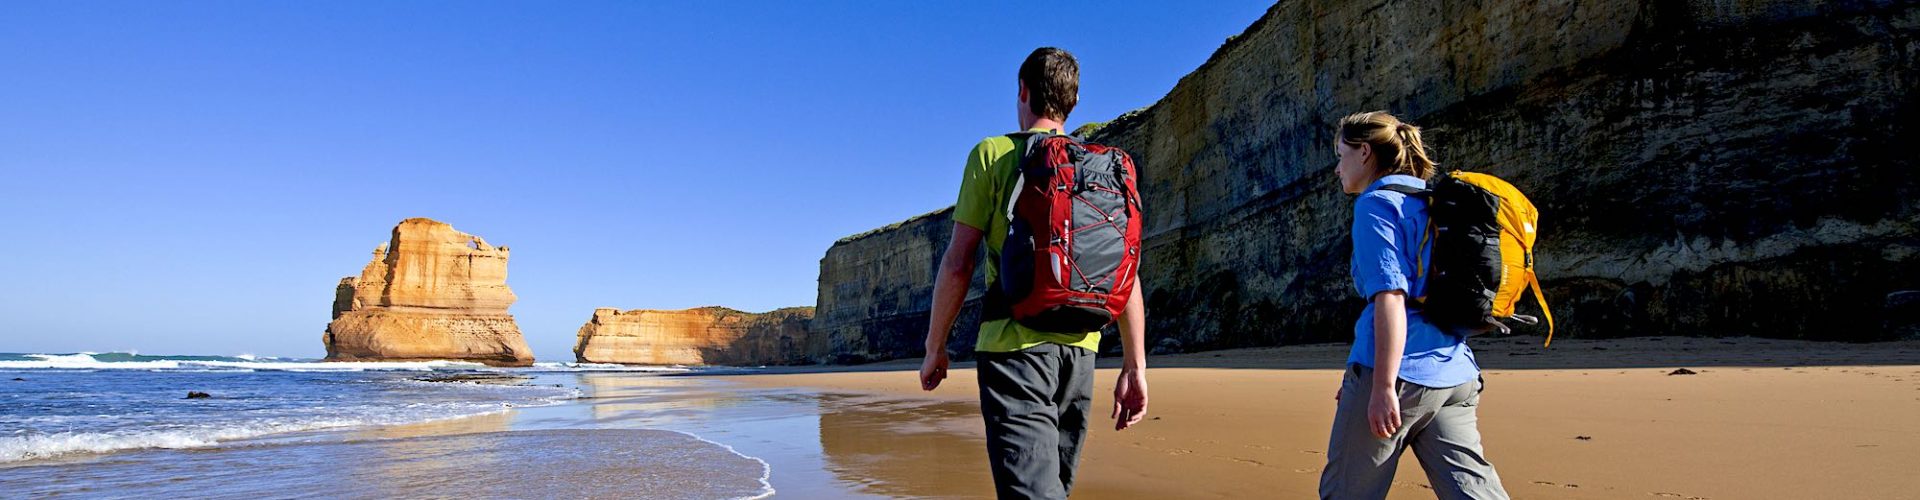 Review: Four-day Great Ocean Road walking tour immerses guests in a sublime coastal landscape inner banner